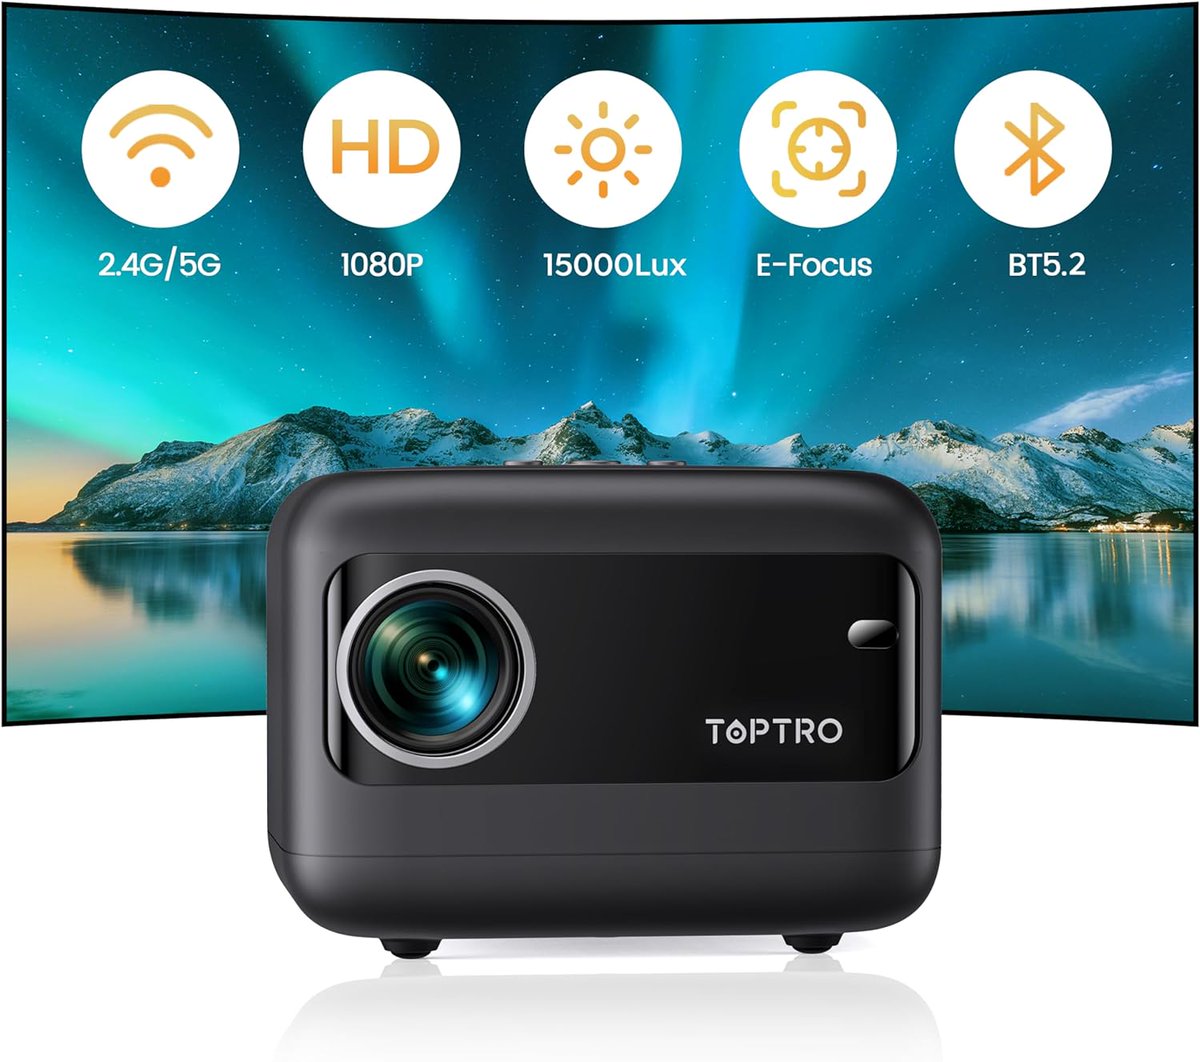 TOPTRO TR25 Portable Projector with WiFi and Bluetooth 5.2 is $123.49 (35% OFF) w/ Promo Code J5AIGDMD on Amazon amzn.to/4au9taf #ad